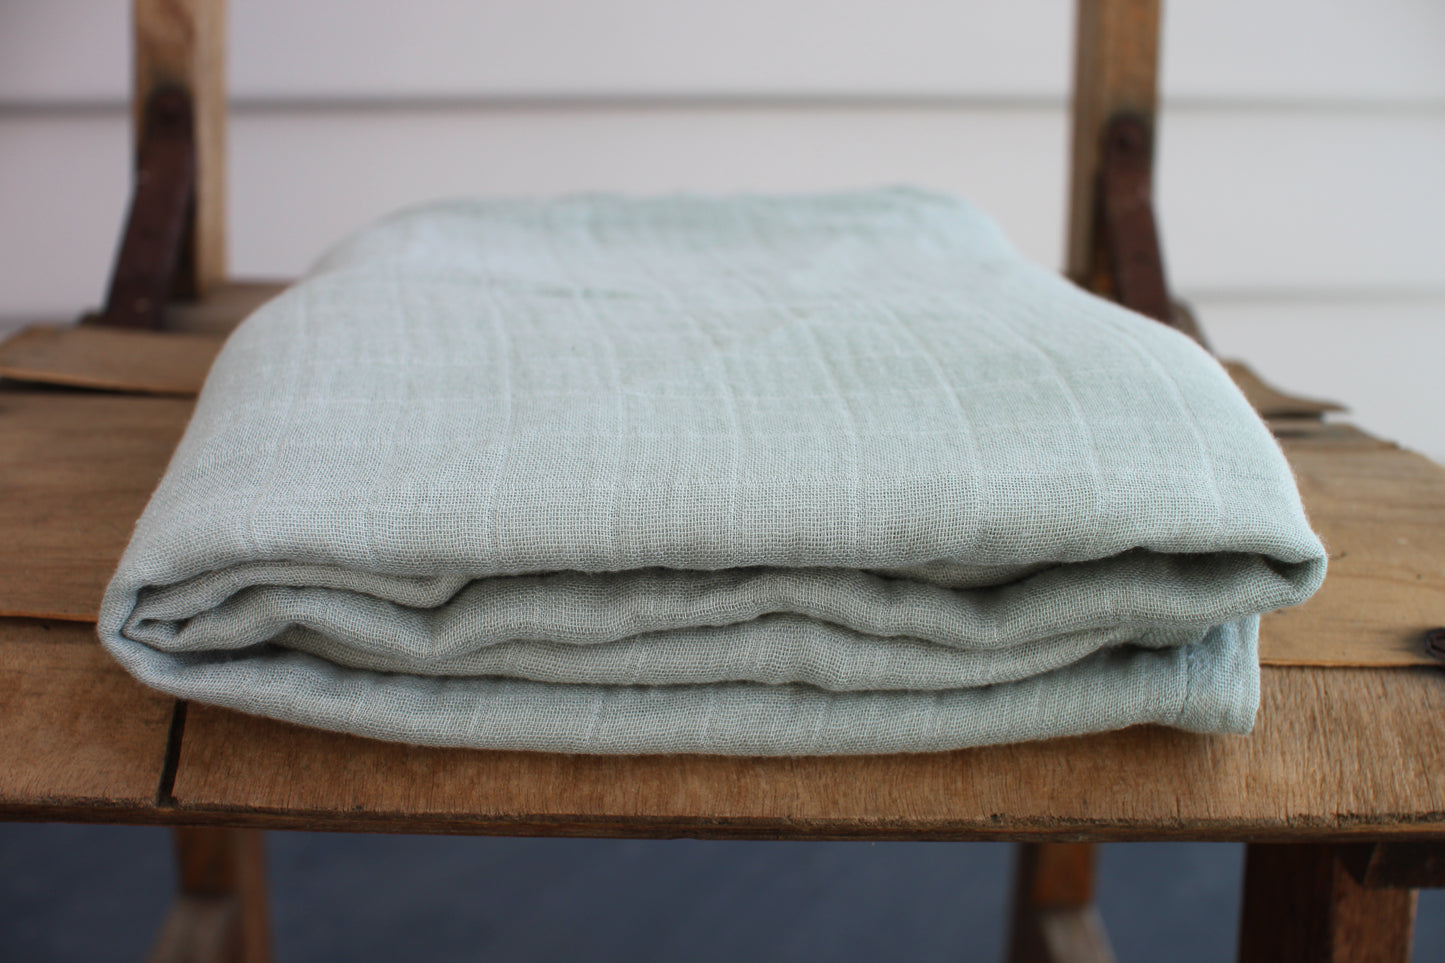 One moss green muslin cloth sits folded on a wooden chair. 